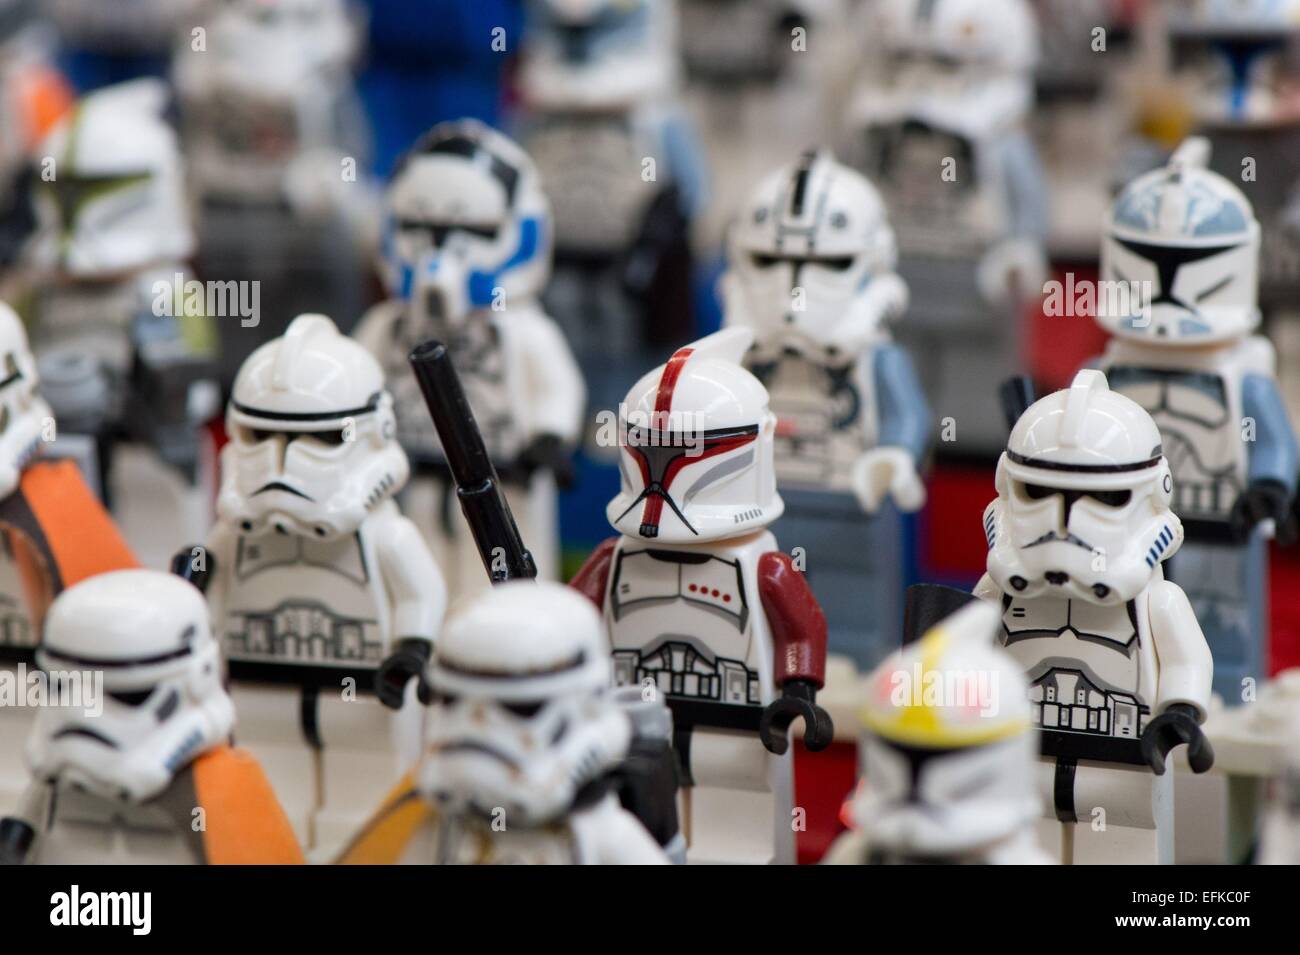 Erfurt, Germany. 6th Feb, 2015. Lego Star Wars characters are on display at  the model building fair 'Erlebniswelt' in Erfurt, Germany, 6 February 2015.  The fair runs from 6 February to 8